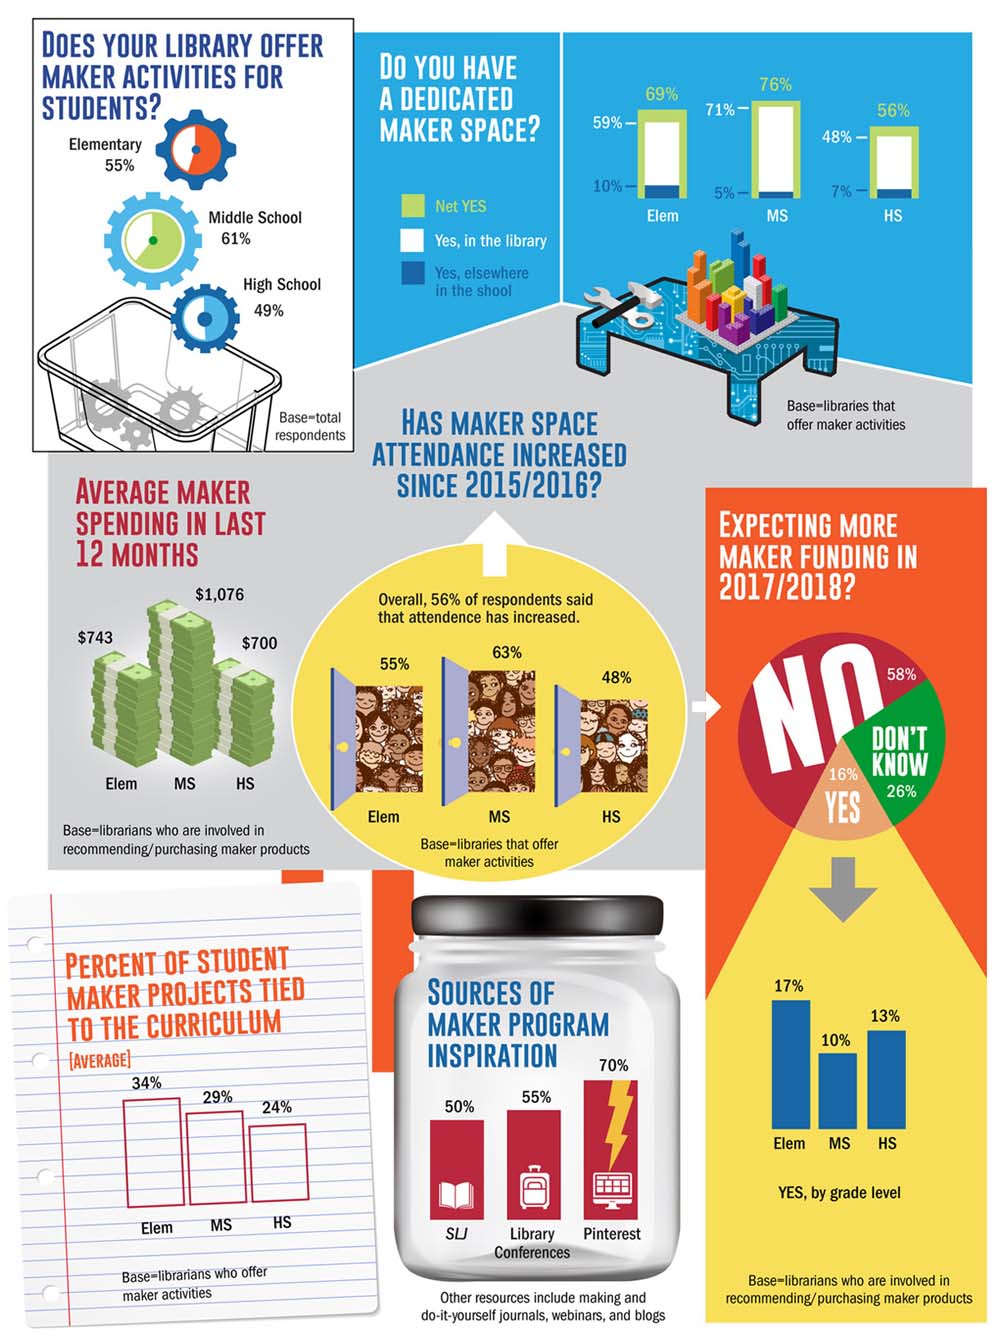 Maker Movement Grows in K-12, with Librarians Leading the Way, Finds SLJ Survey